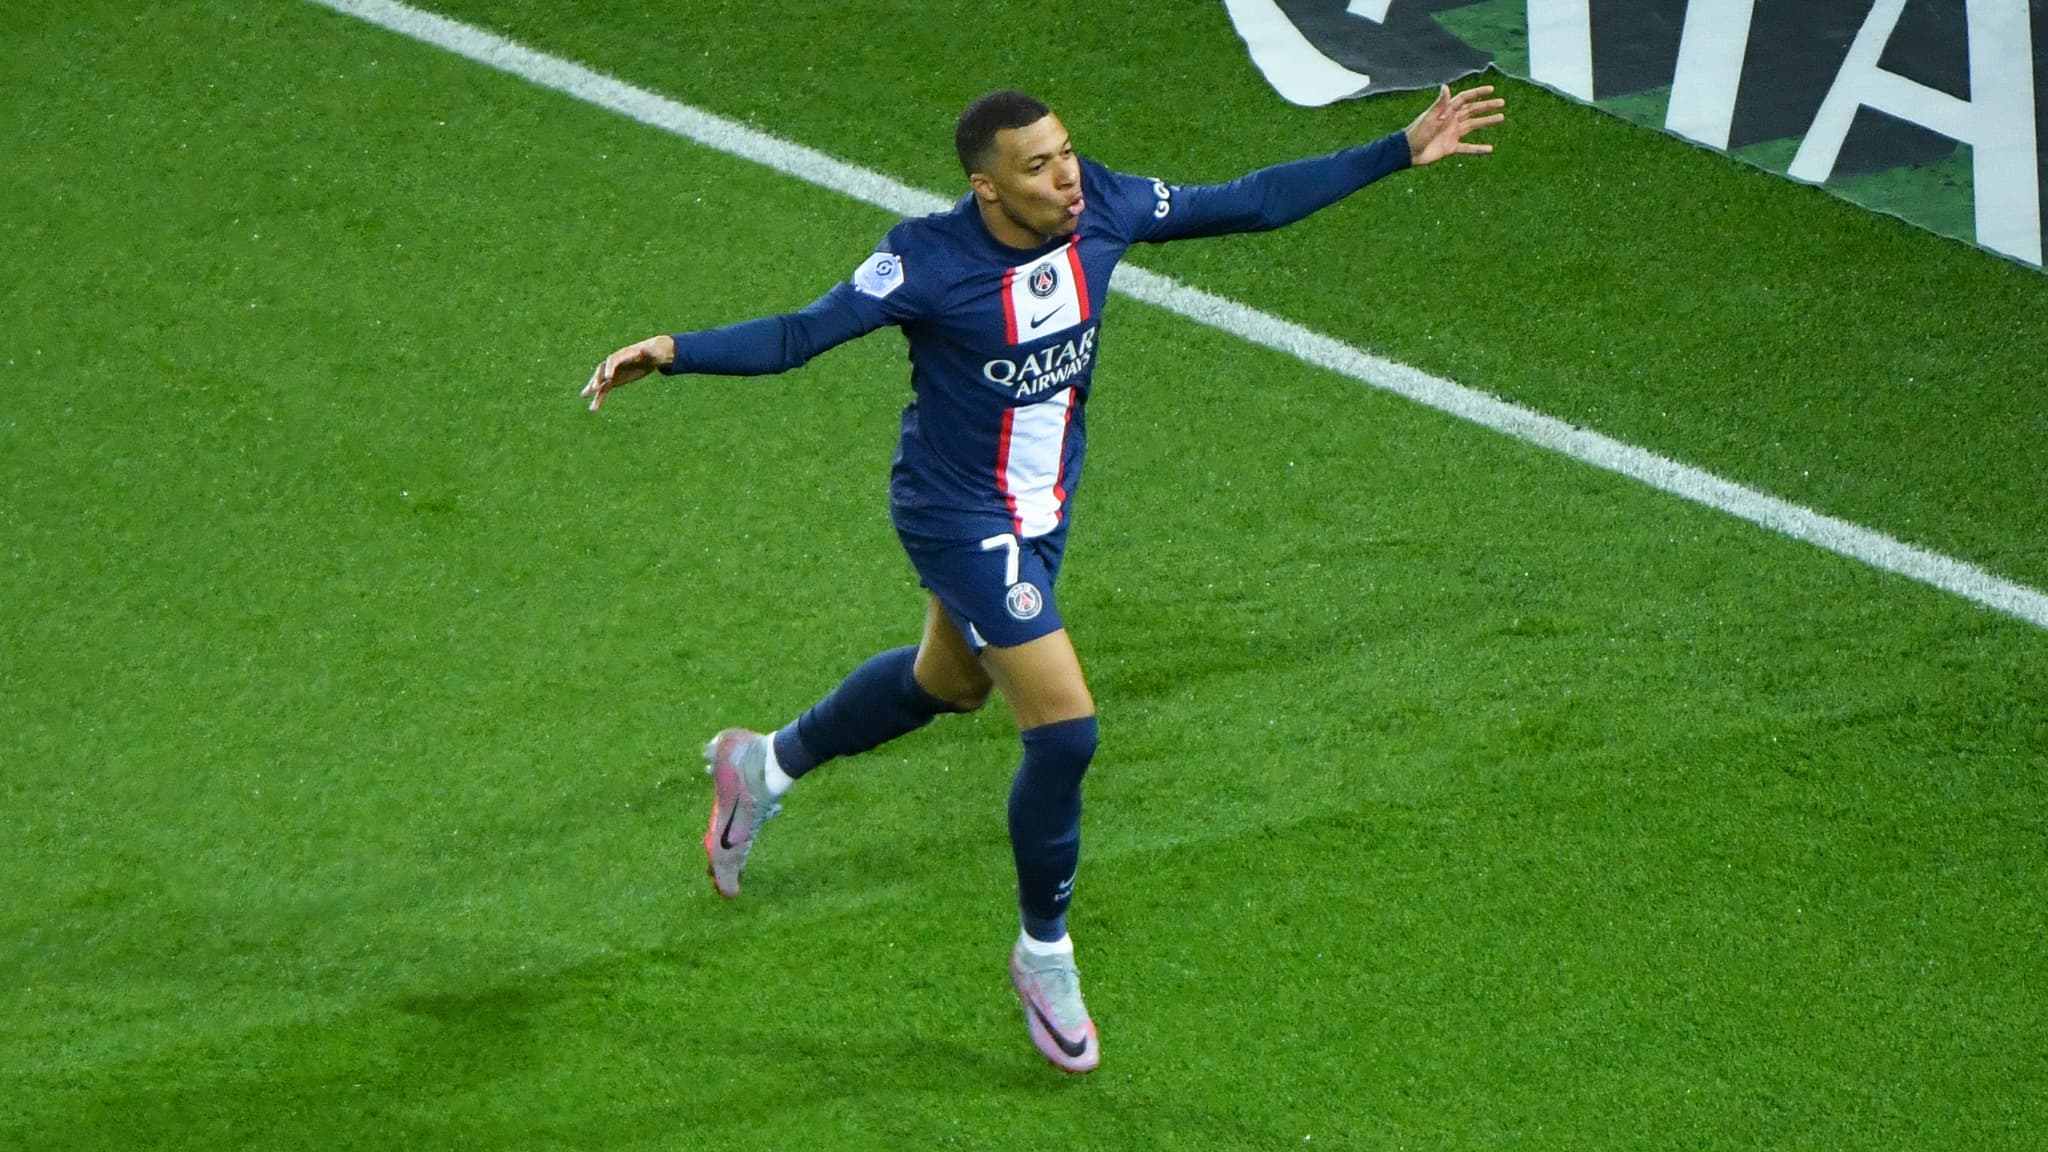 Mbappe became the only scorer in the history of Paris Saint-Germain in the French first division